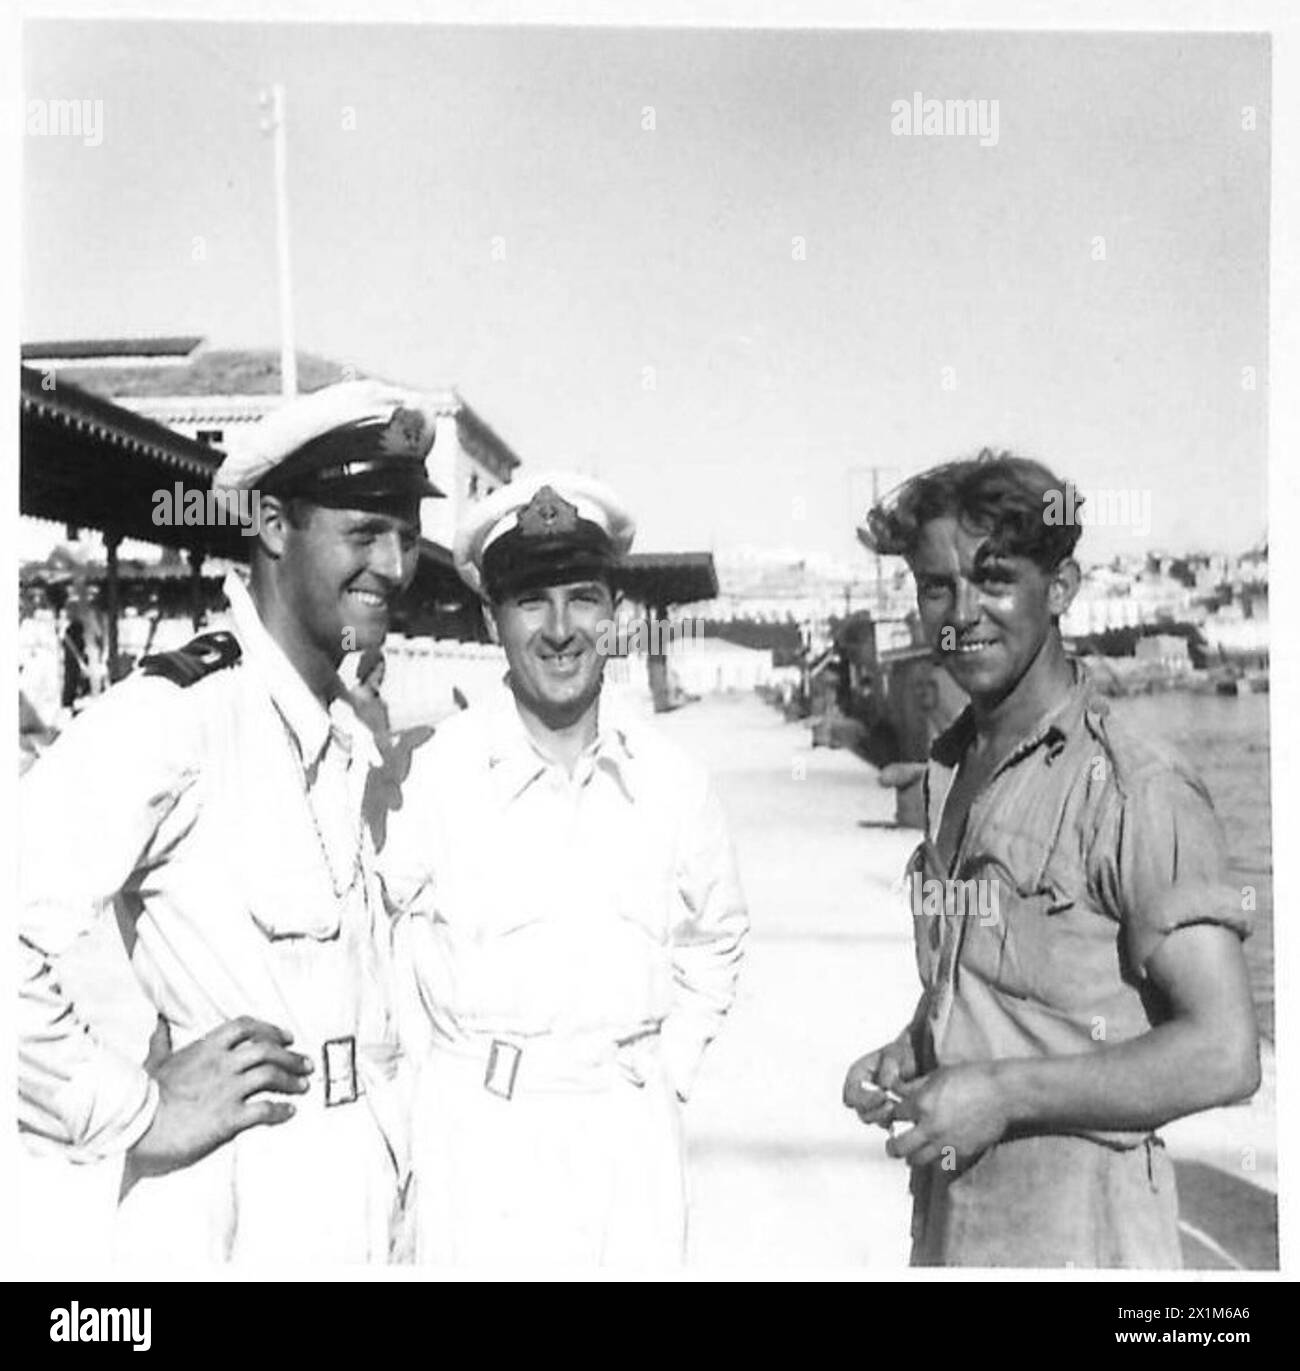 INVASION OF SICILY H.M. FLEET SWEEPER 'SEAHAM' CAPTURES ITALIAN SUB. - Left to right: - 1st Lieut. W.S. Daswon R.N.V.R., of Glasgow chats to Lieut. C.H. Sharp, R.N.V.R., of Oxford, navigator and officer of the 'Watch', who sighted the submarine when it first surfaced and gave orders to ram her. The vessel crashed as Seaman C. Mooney of Sheffield who was lookout on the Seaham and confirmed the sighting of the U Boat, British Army Stock Photo